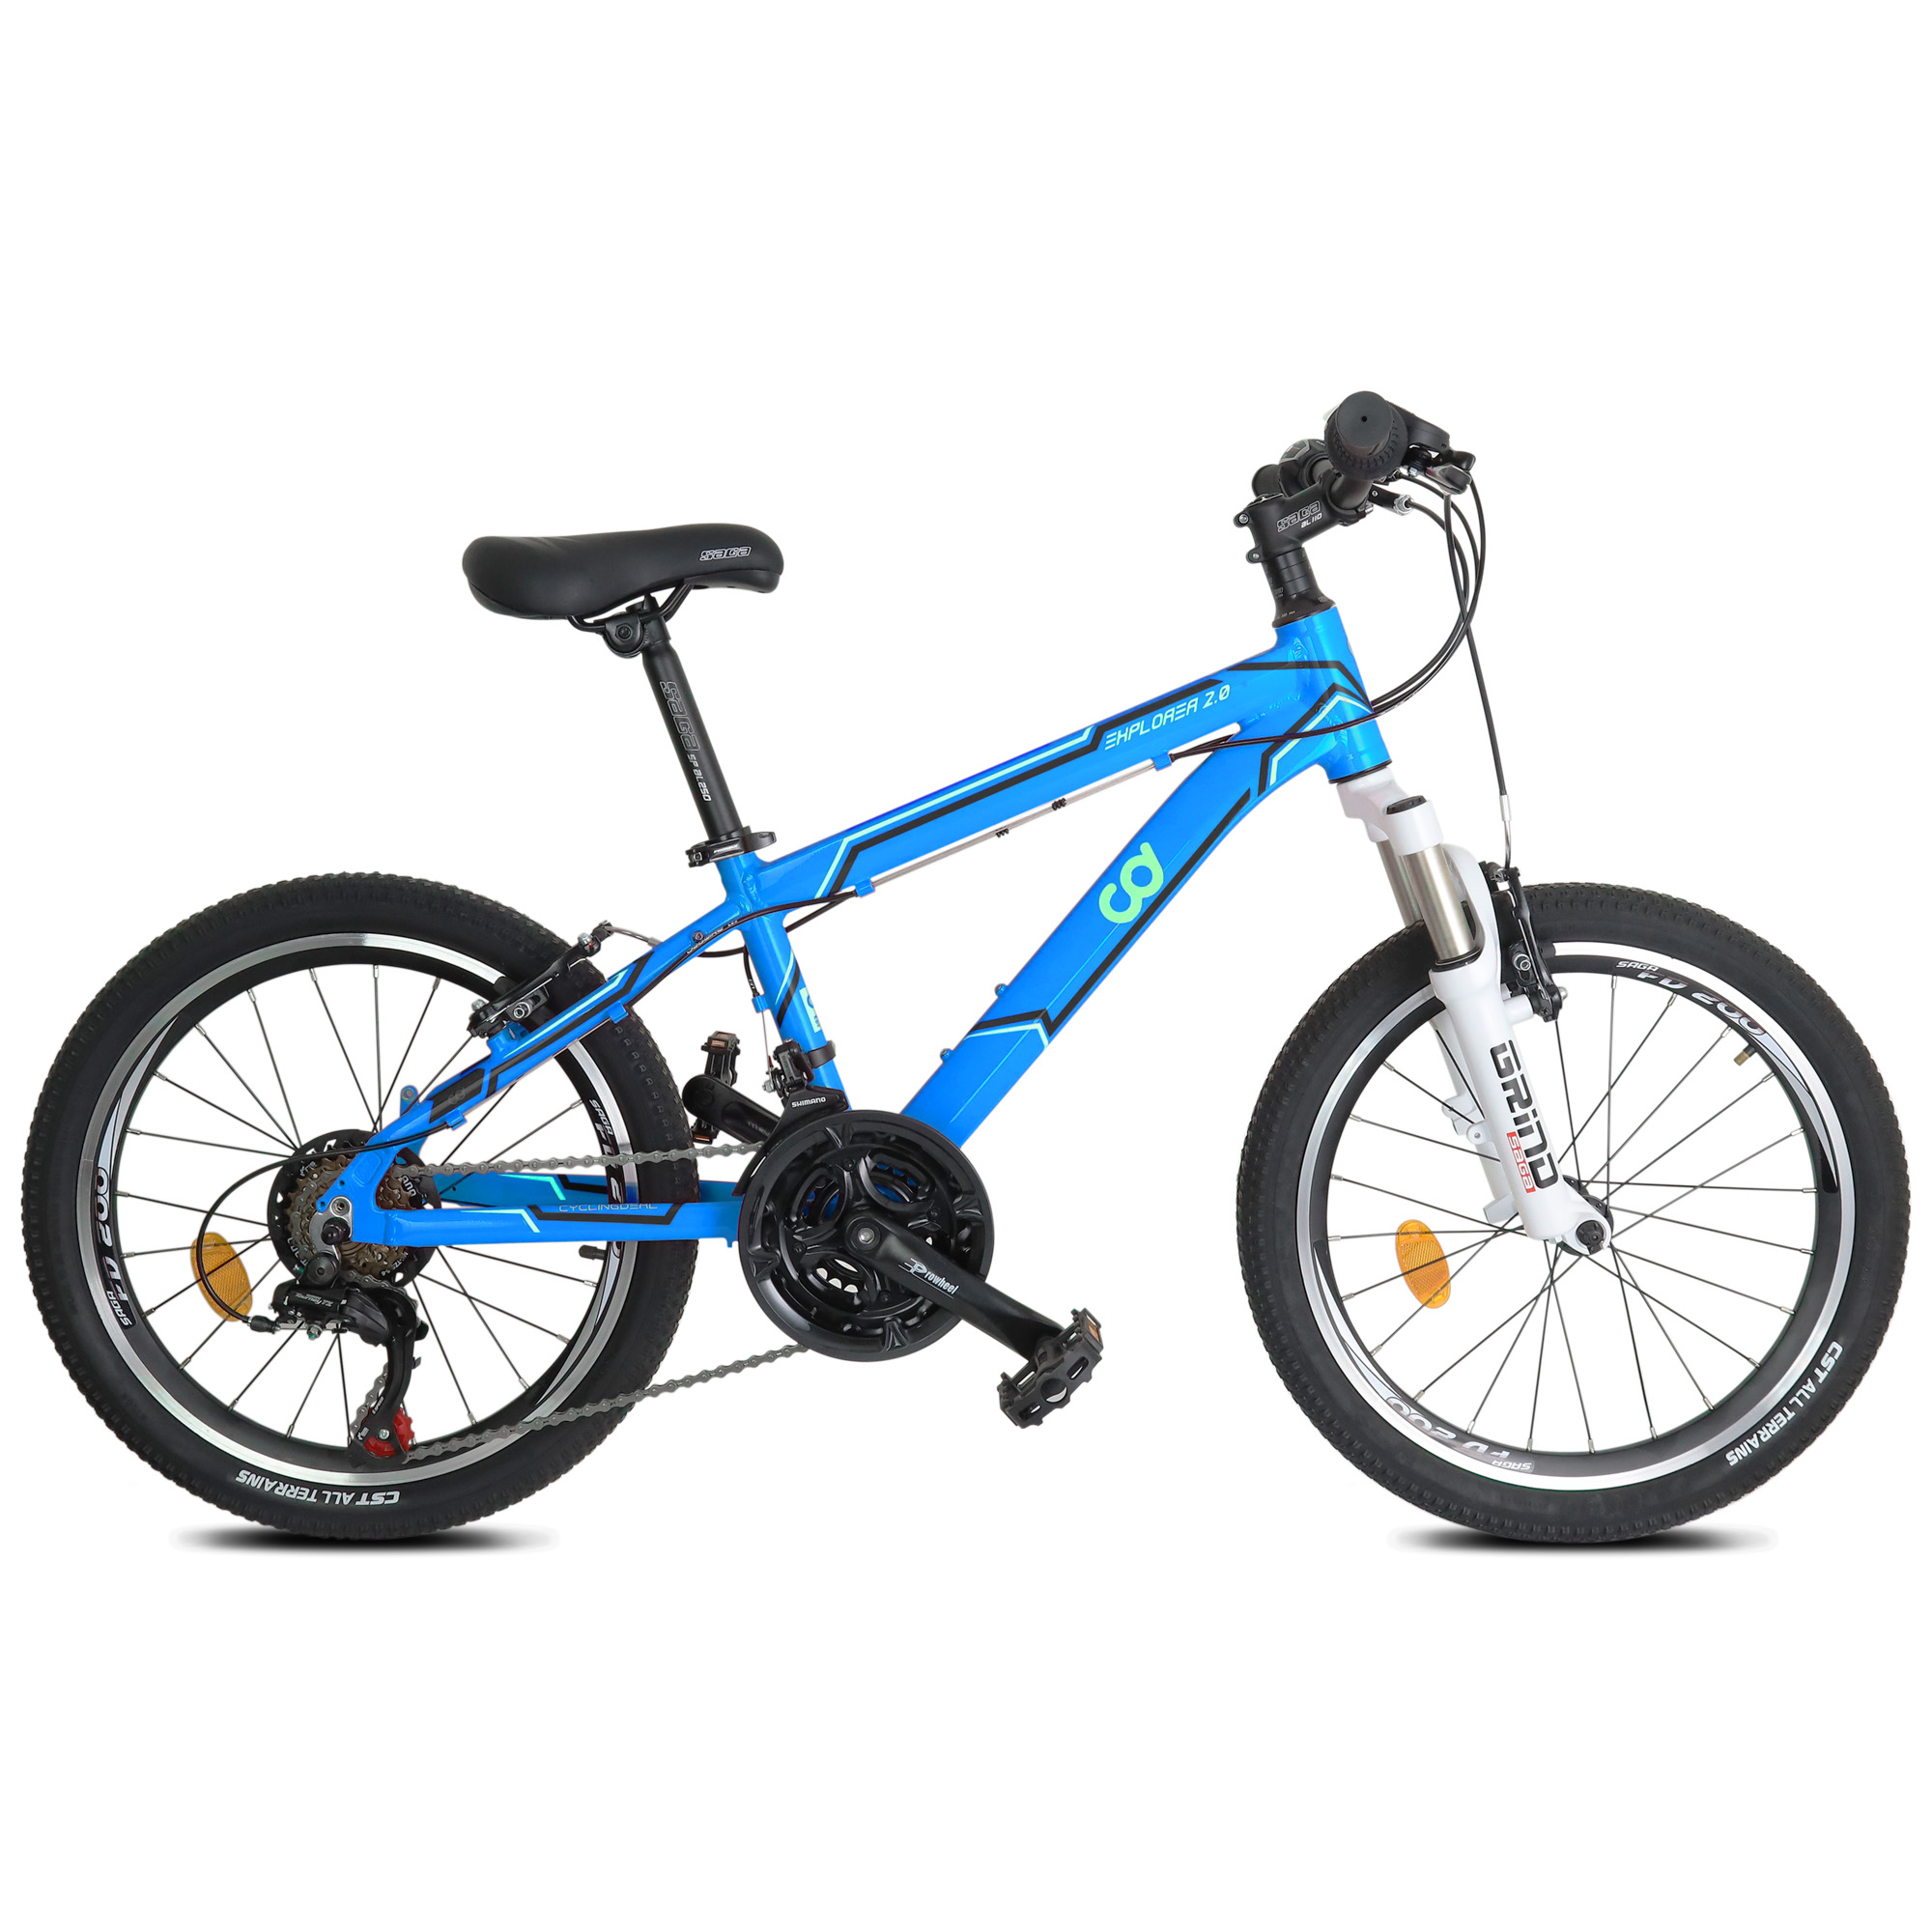 CyclingDeal Kids Children Mountain Bike Bicycle MTB Blue with Detachable Training Wheels - 18 Speed 20" Wheels 12" Frame for 5-10 Years Old